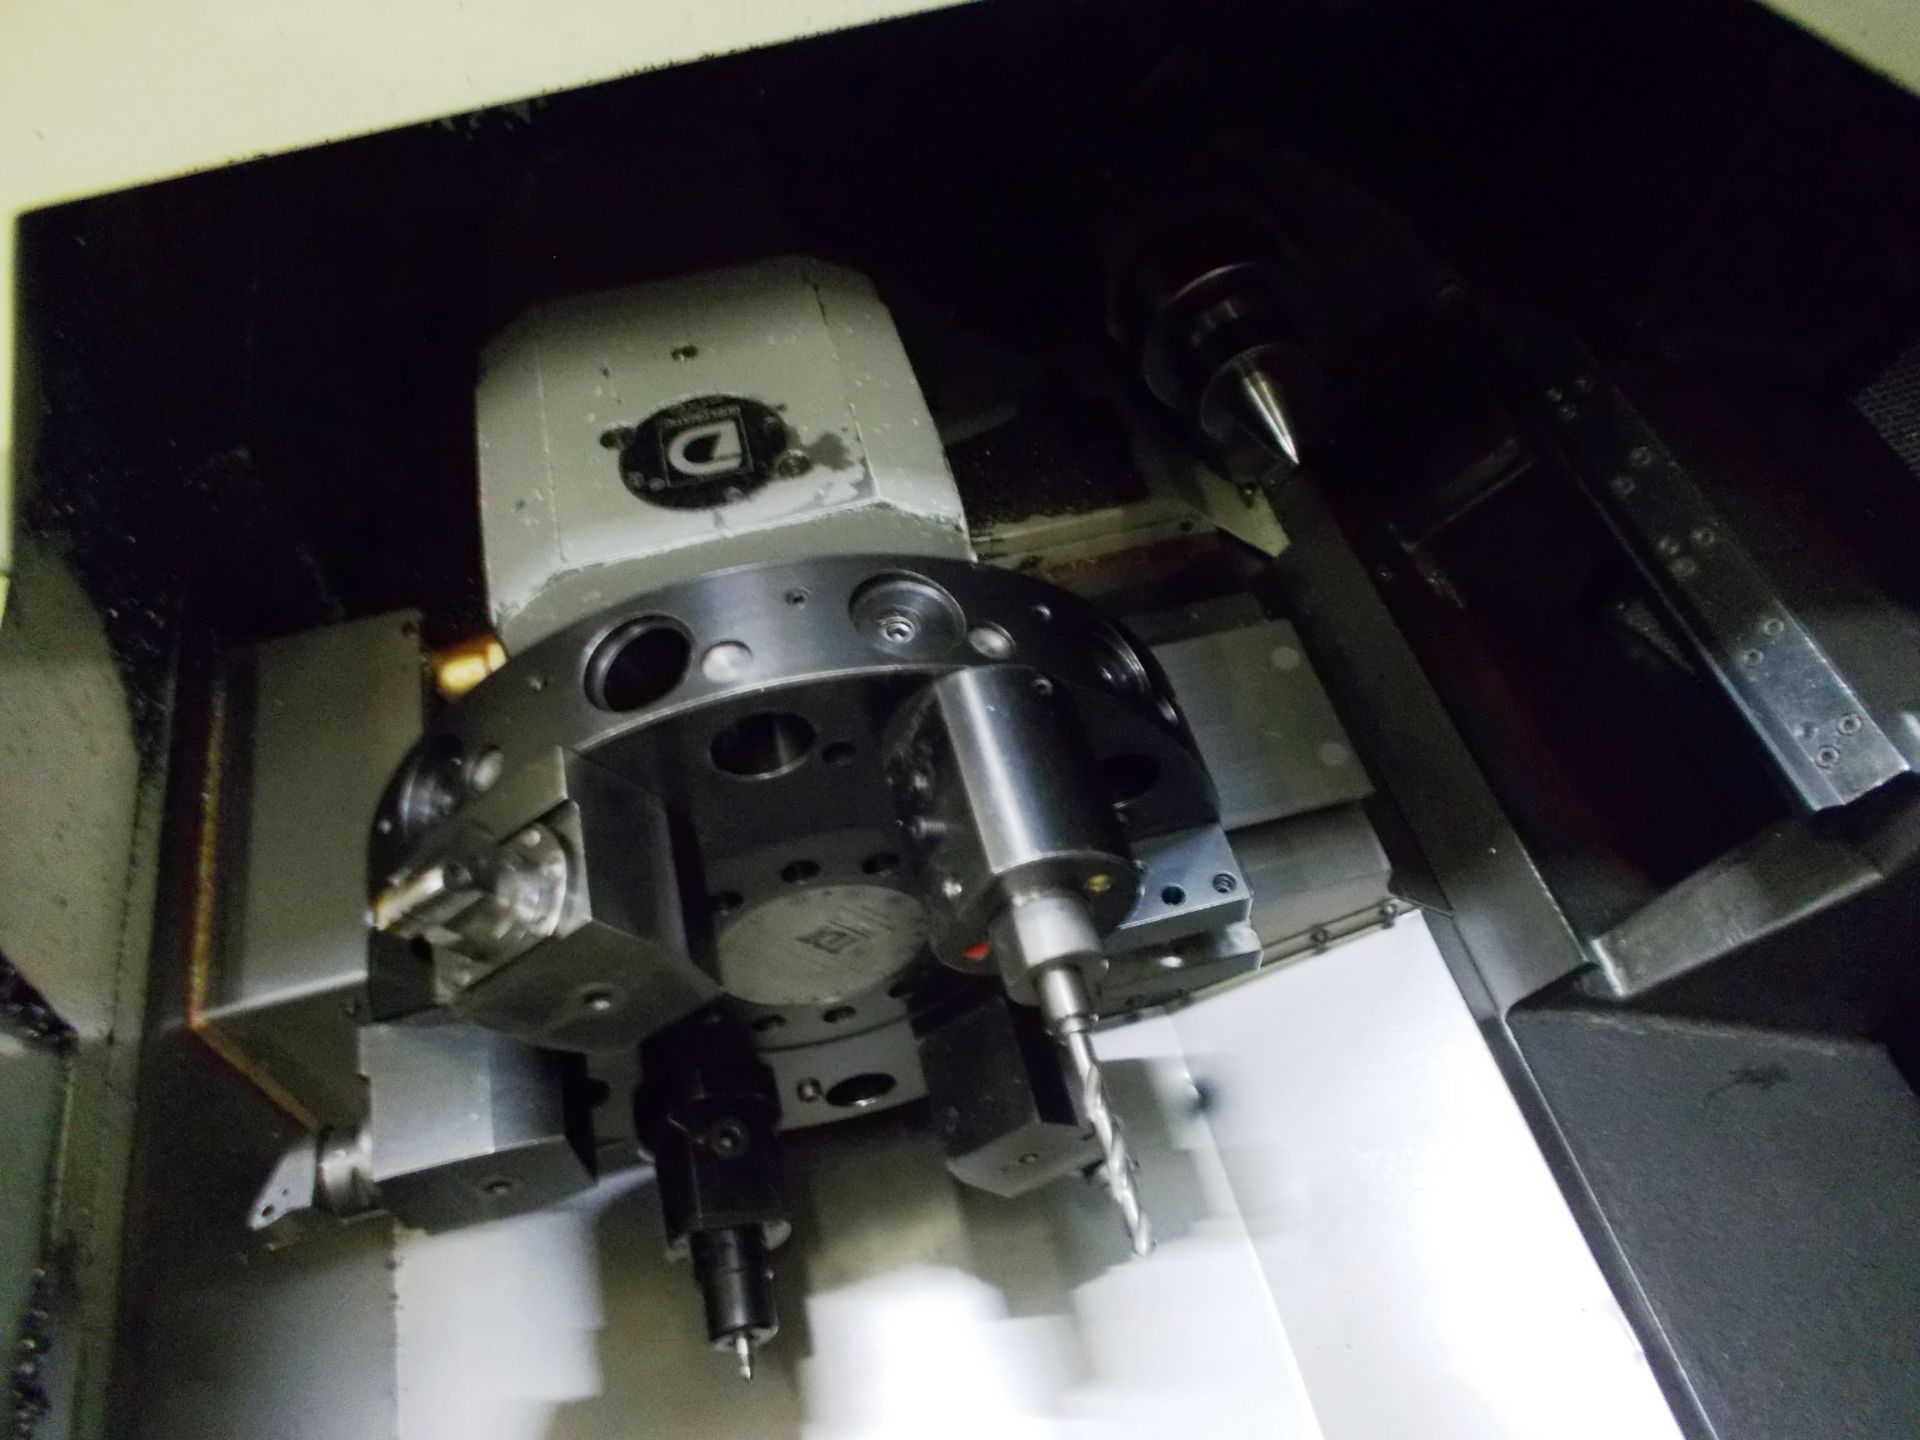 Colchester Tornado 200 CNC lathe (Serial Number: C20241, Year: 1995), with Fanuc Series OT control - Image 4 of 6